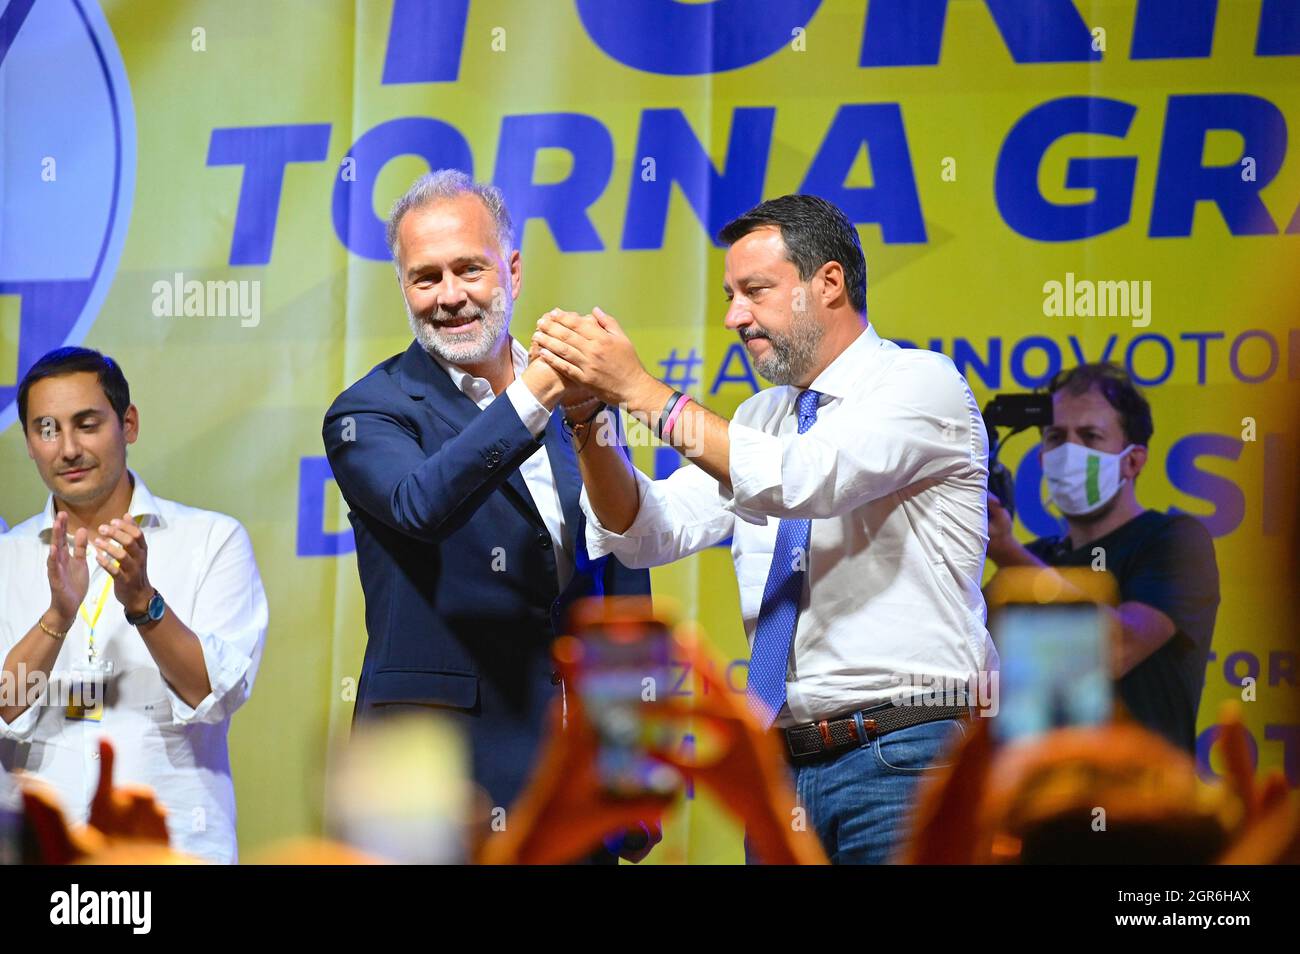 T, ITALY - Sep 09, 2021: A shallow focus of Paolo Damilano candidate for mayor for the Lega party Stock Photo